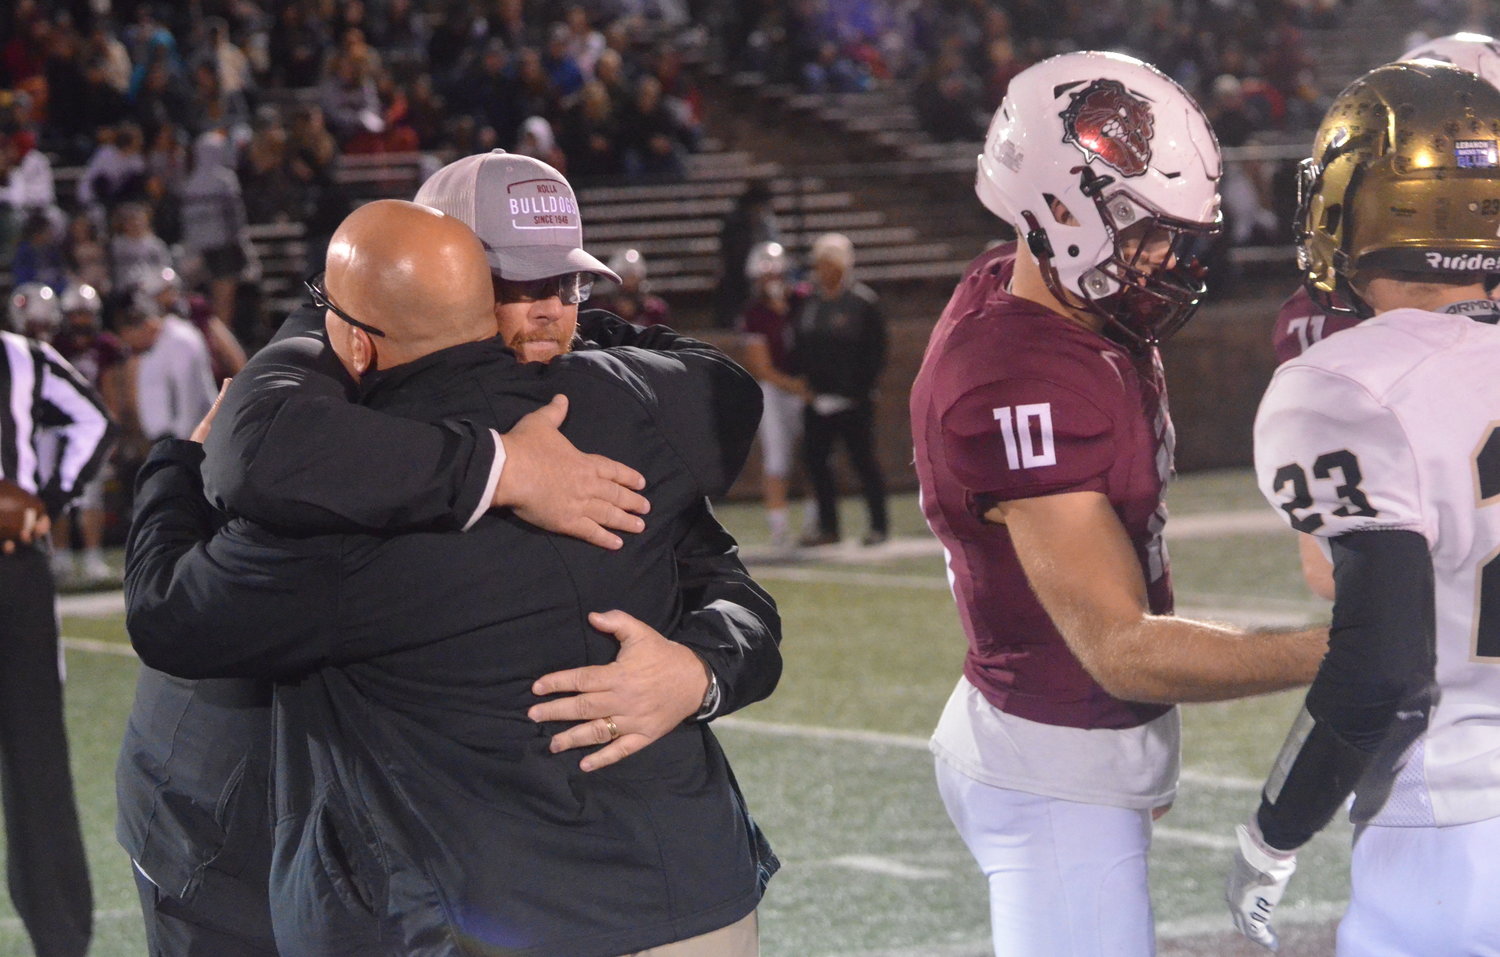 LCR photo/Alex Boyer
Rolla head coach Jon Franks and Lebanon head coach Will Christian exchange a hug before Friday's game.